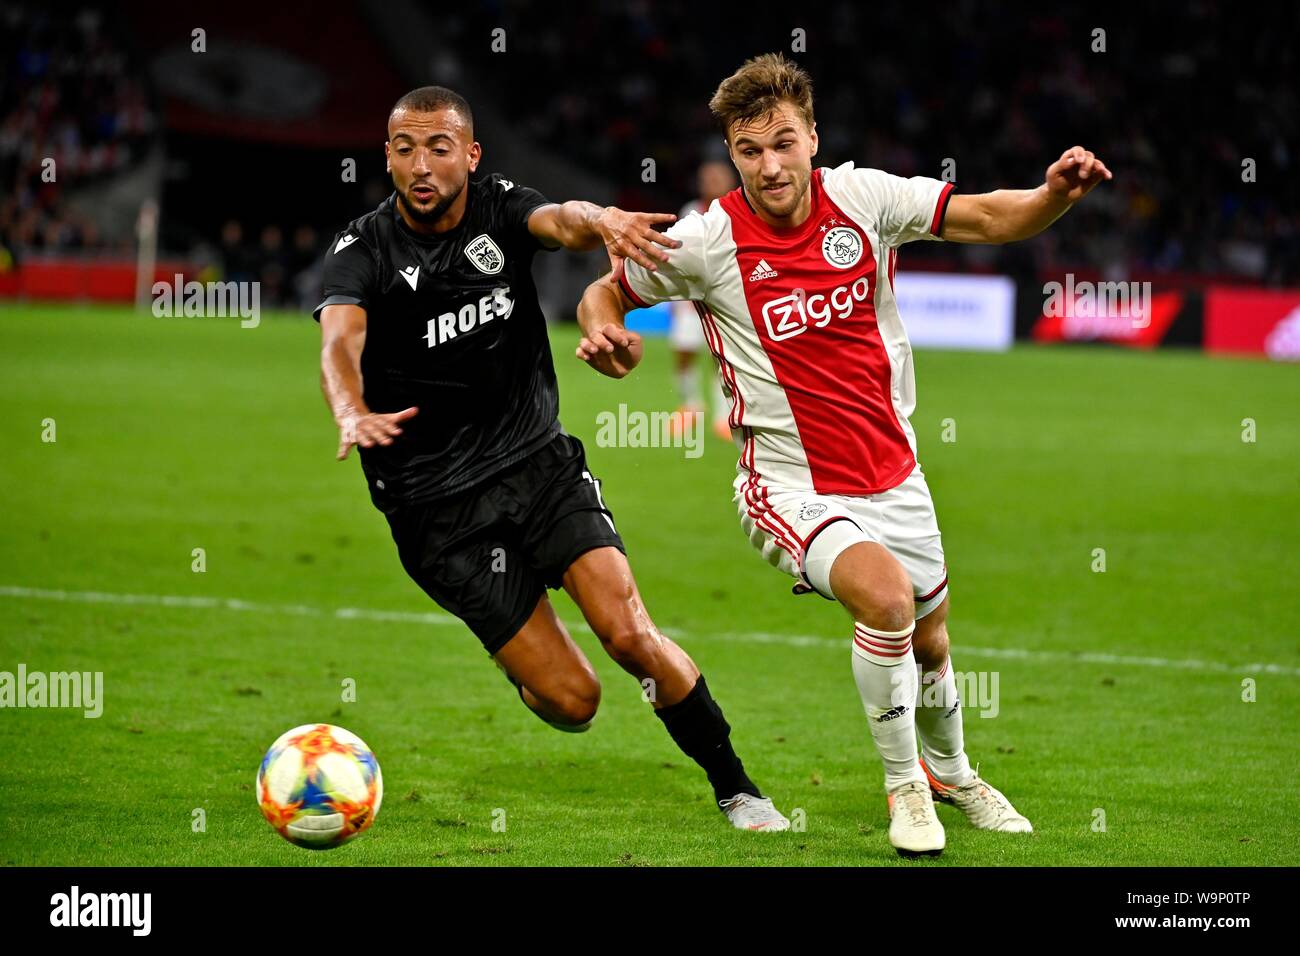 Joel Veltman (Ajax) duels Omar El Kaddouri during the UEFA Champions League third round qualifying second leg match between Ajax Amsterdam and PAOK FC at the Johan Cruijff Arena on August 13, 2019 in Amsterdam, The Netherlands Credit: Sander Chamid/SCS/AFLO/Alamy Live News Stock Photo